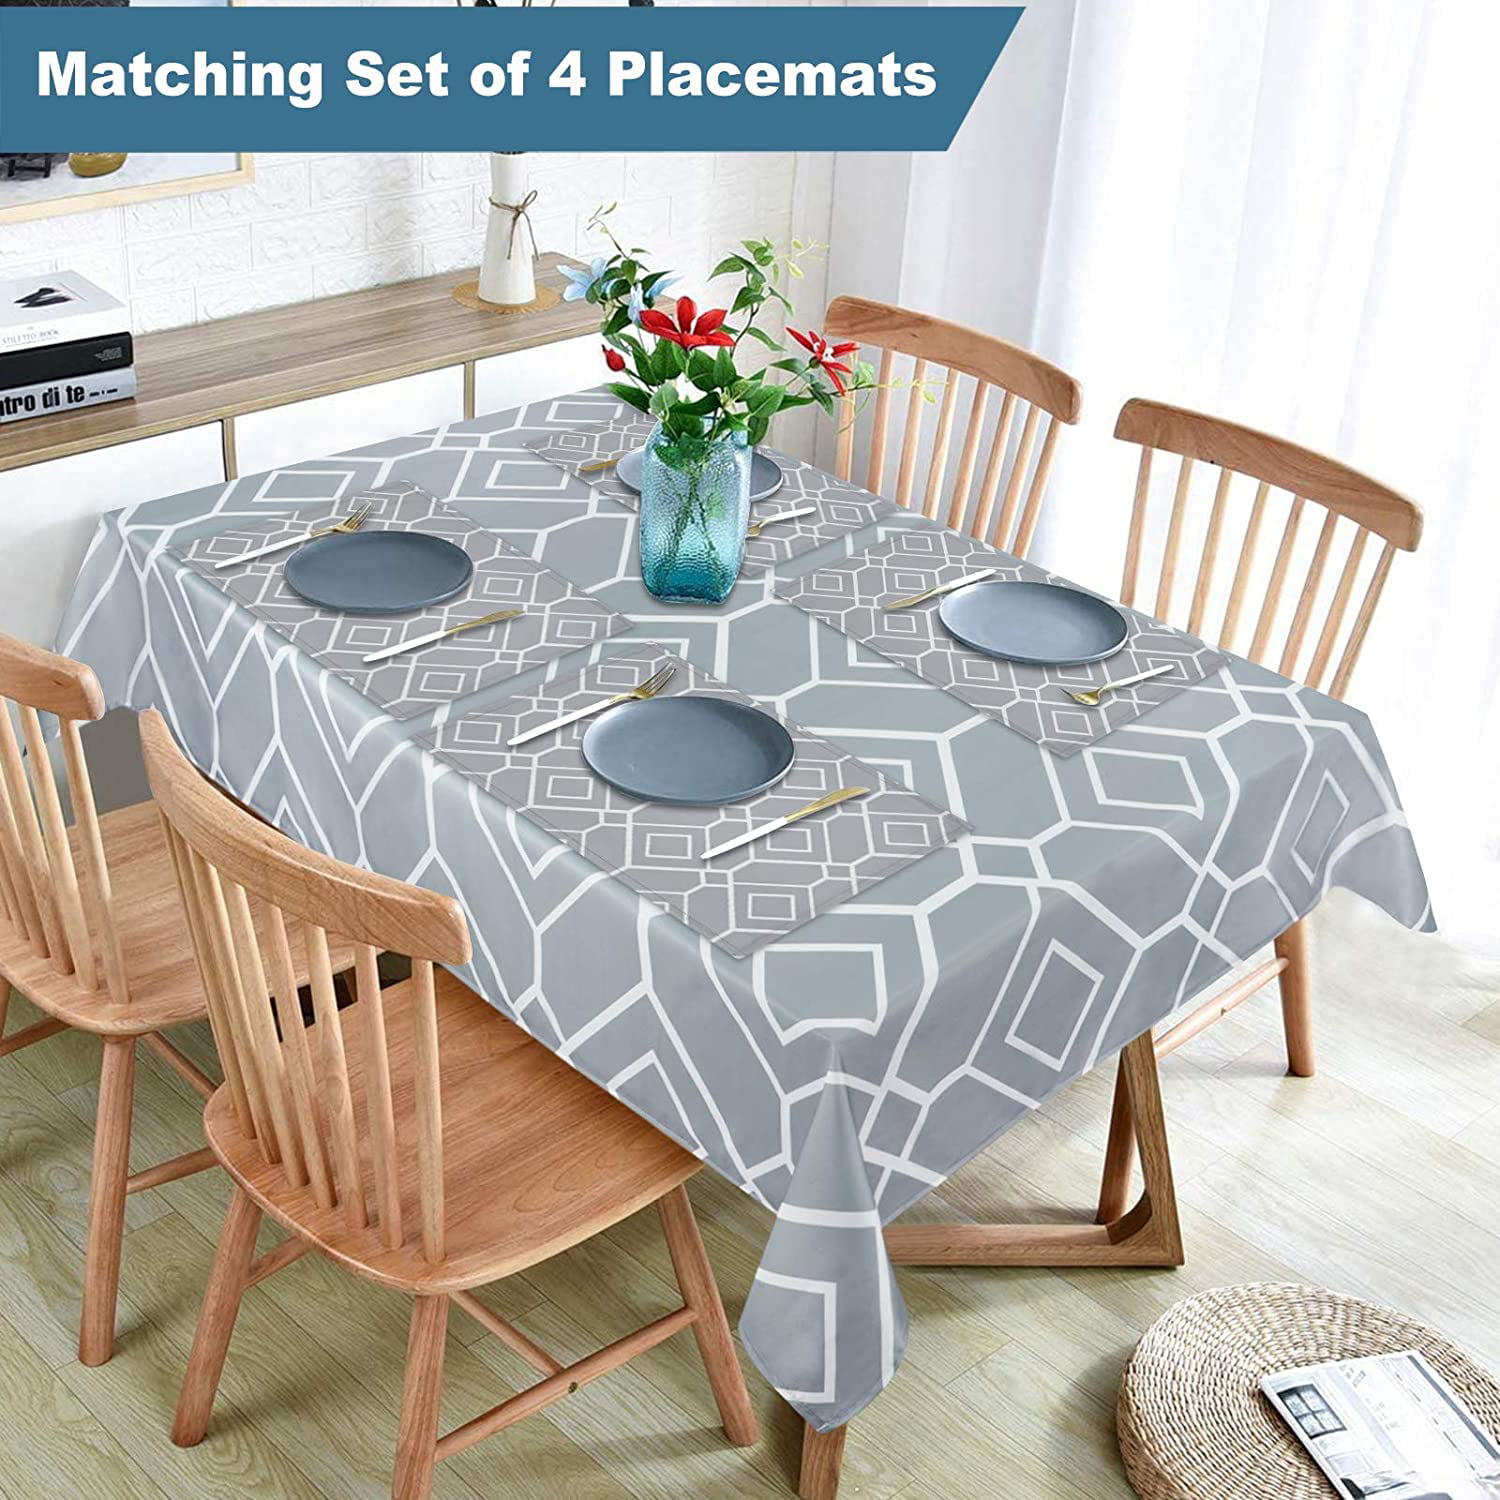 Details about   Geometric Tablecloth Waterproof Rectangular Table Cloth Cover Dining Room Decor 